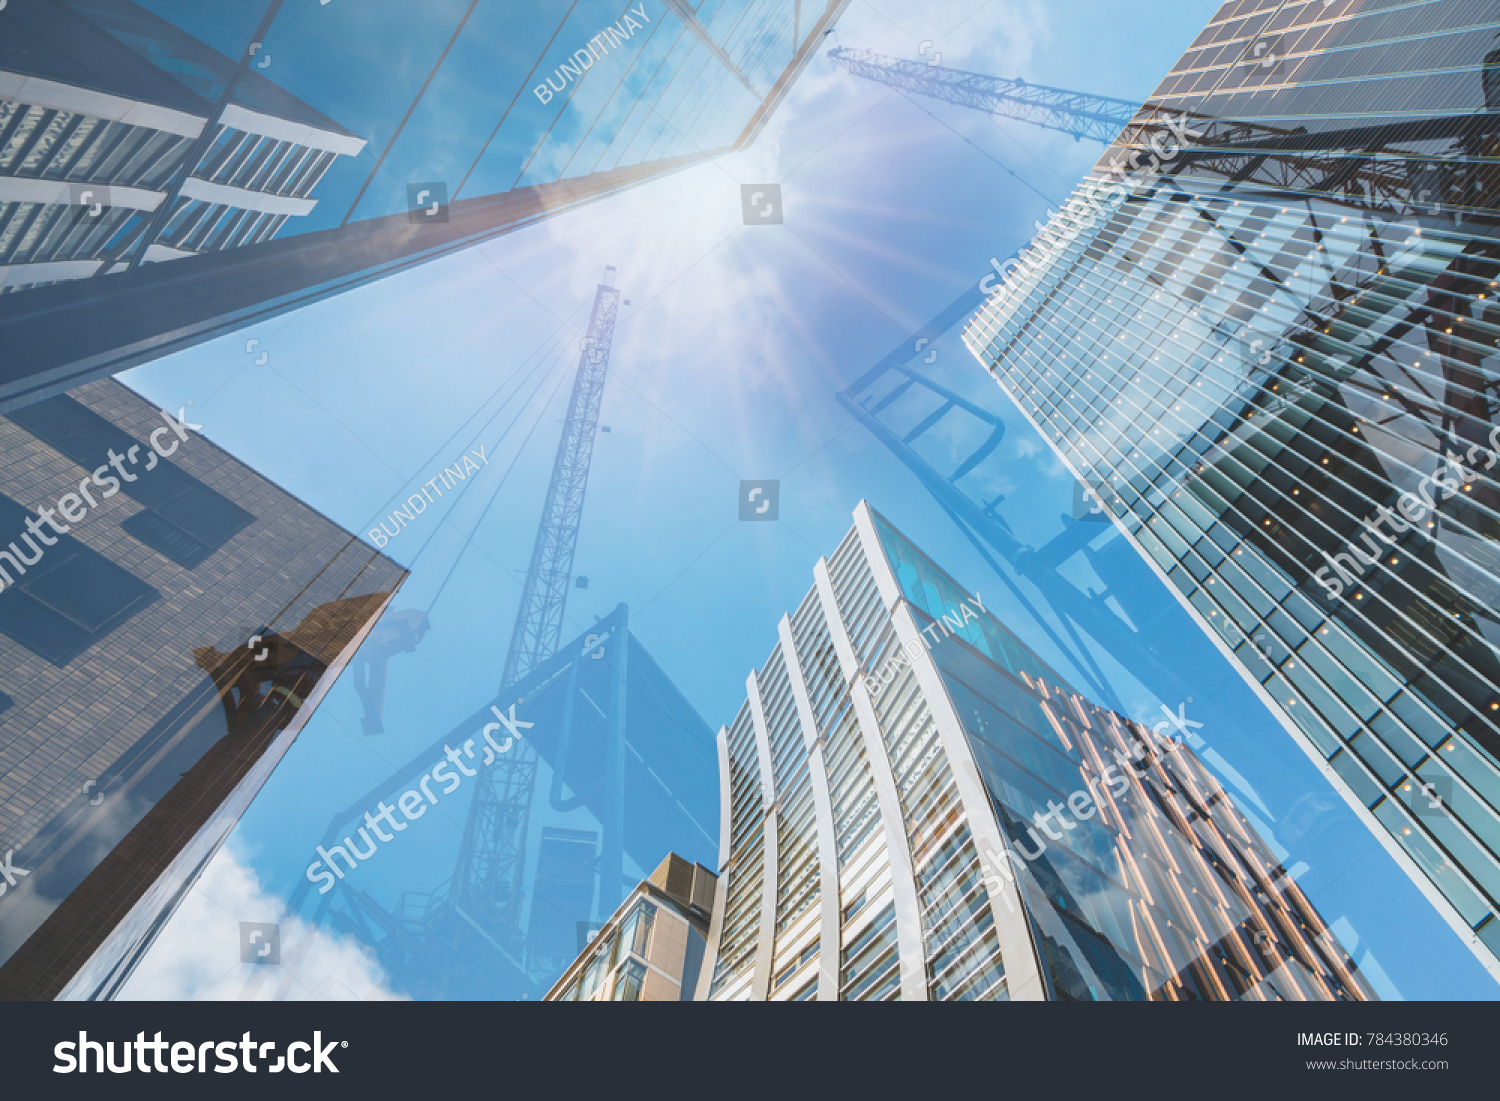 Double exposure of abstract real estate construction site and modern business skyscrapers, high-rise architecture buildings raising to the sky. Concepts of business financial, economics. #784380346